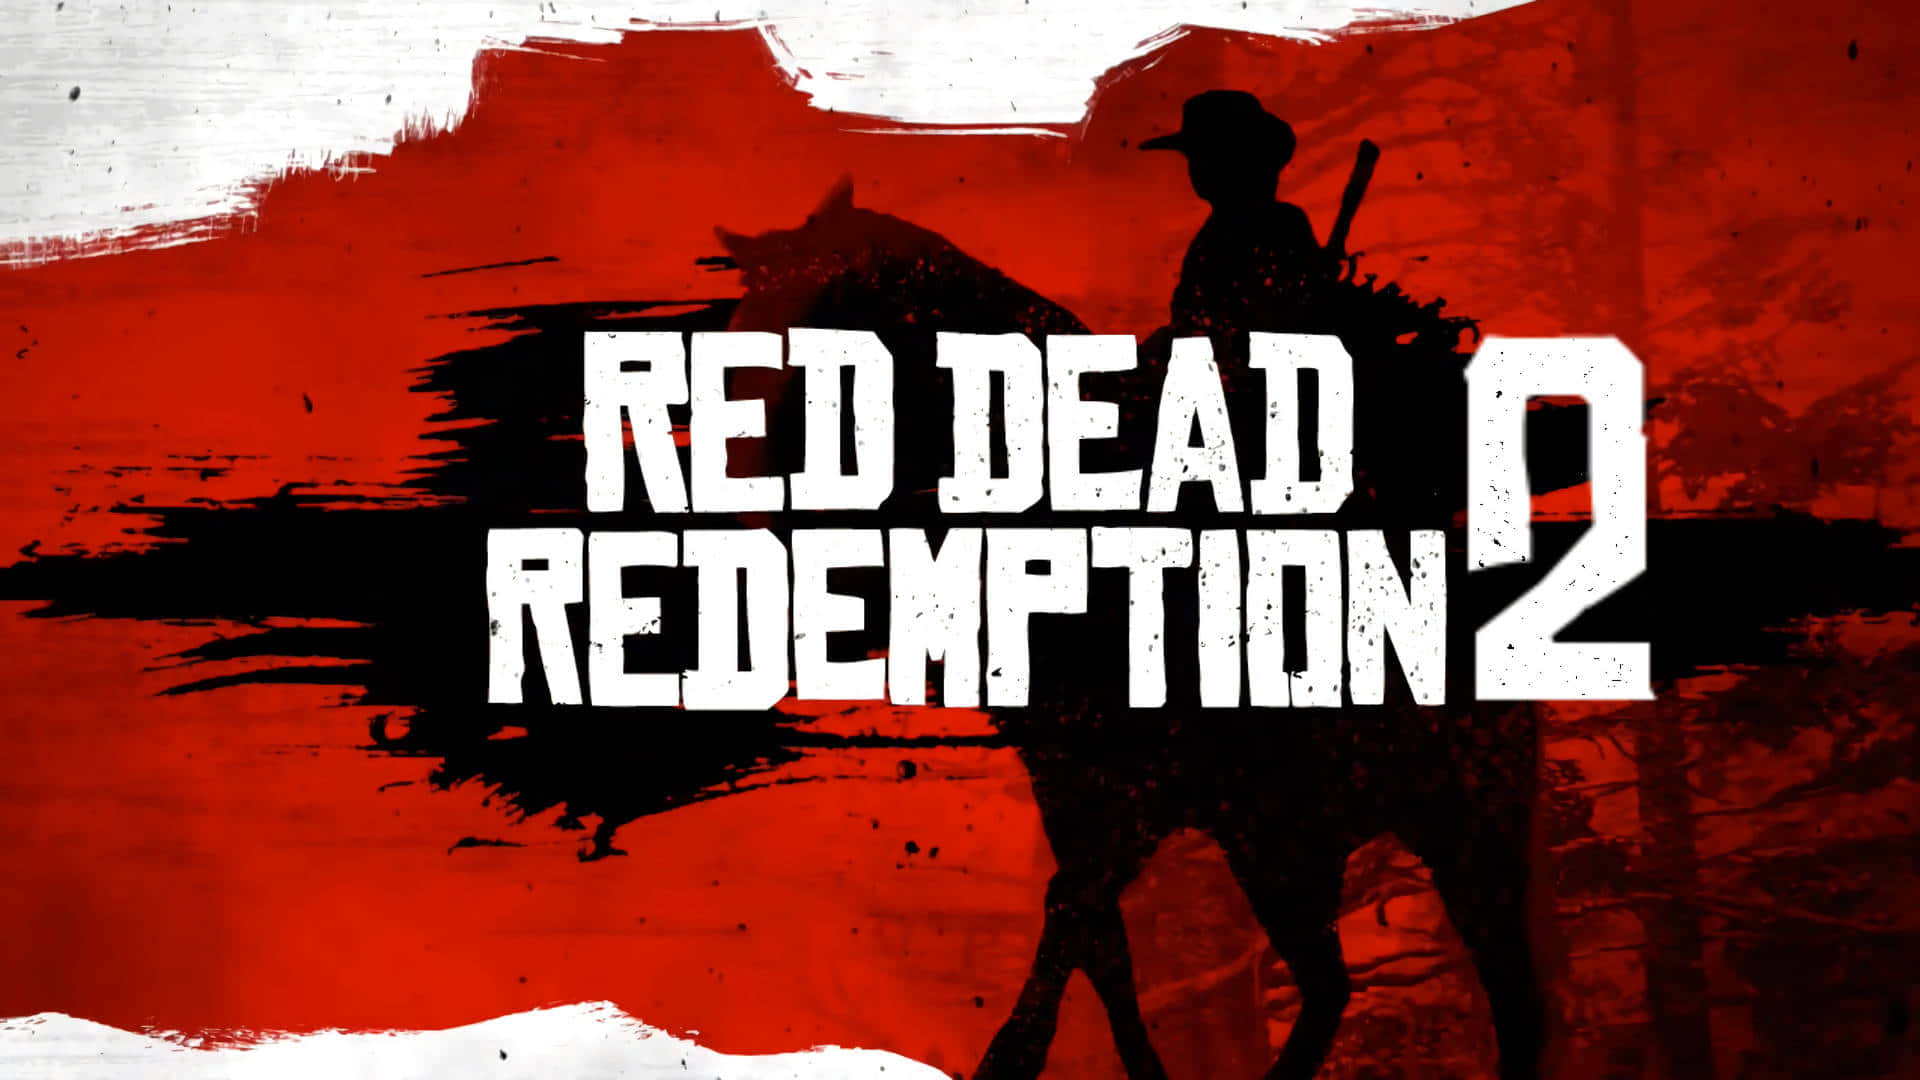 Red And White Poster Design 1920x1080 Red Dead Redemption 2 Background